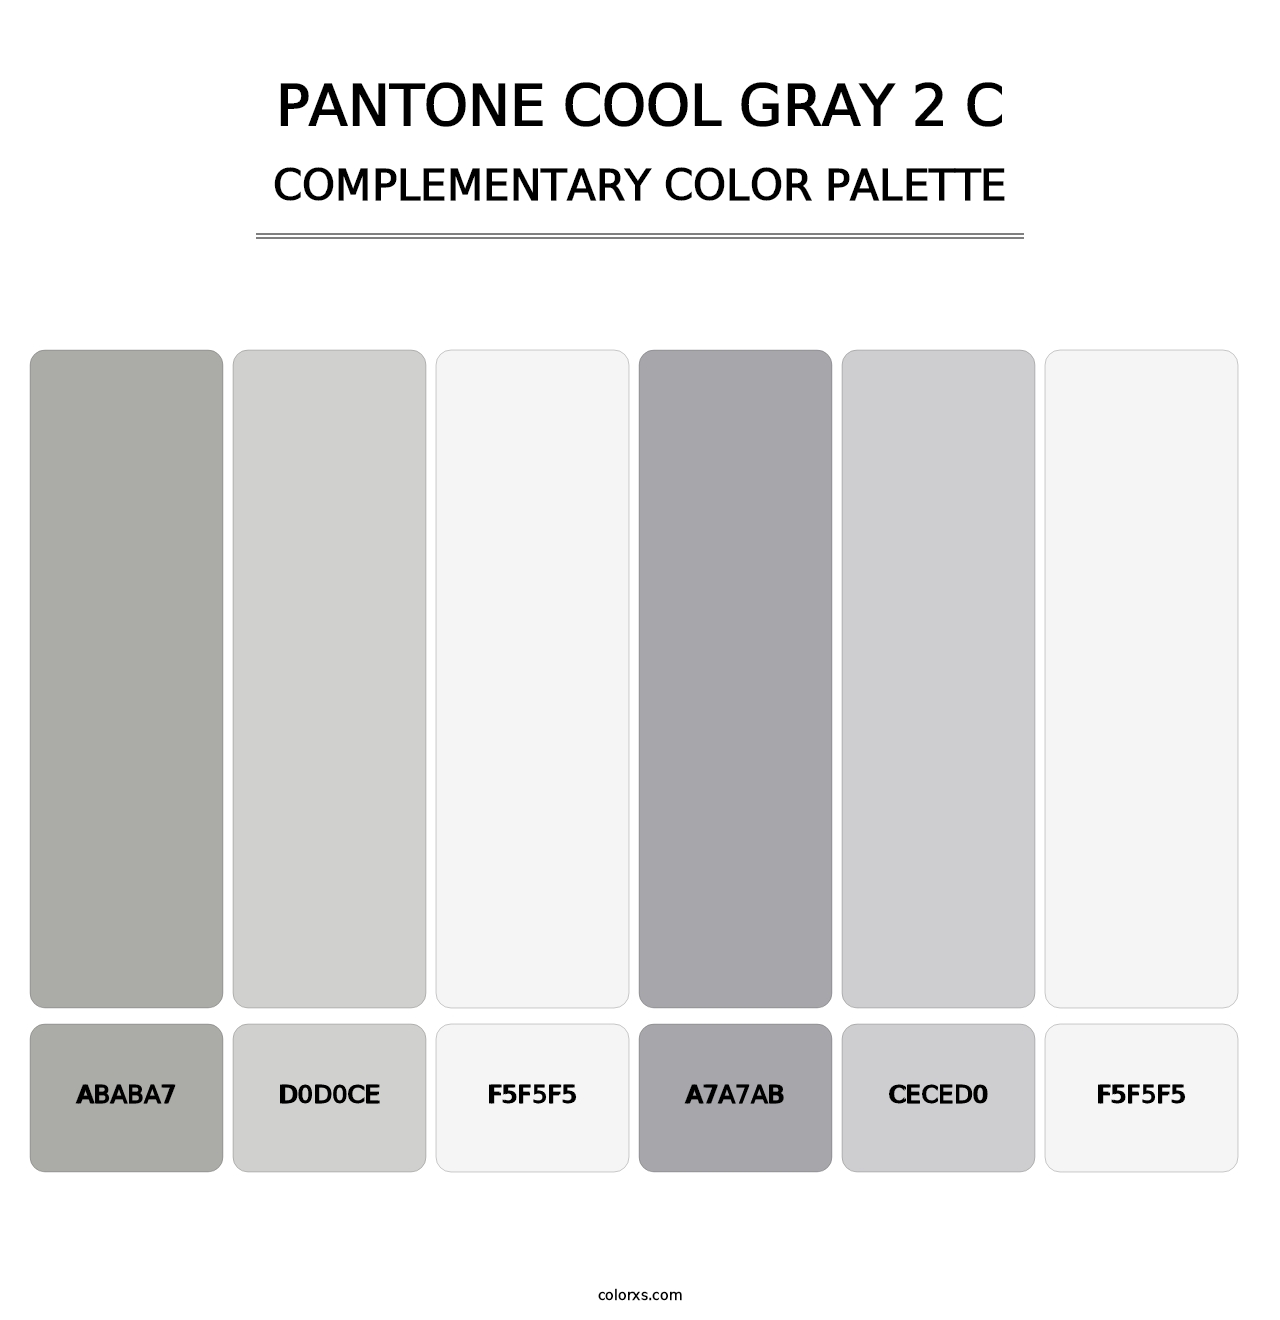 PANTONE Cool Gray 2 C - Complementary Color Palette